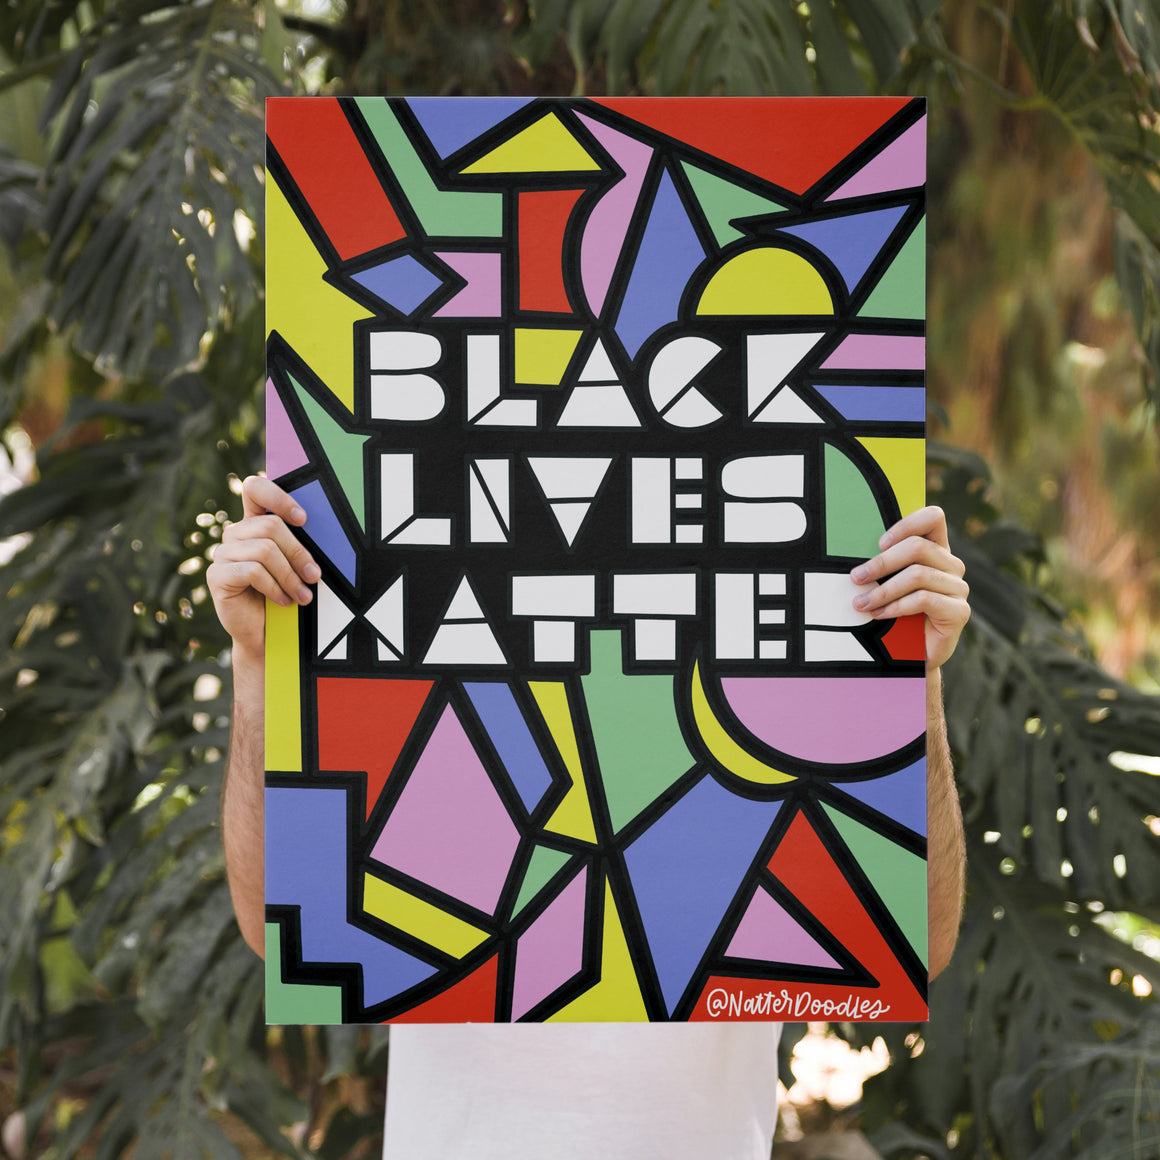 Social Change Coloring Pages + Coloring Protest Signs - Fundraiser for Black Visions Collective